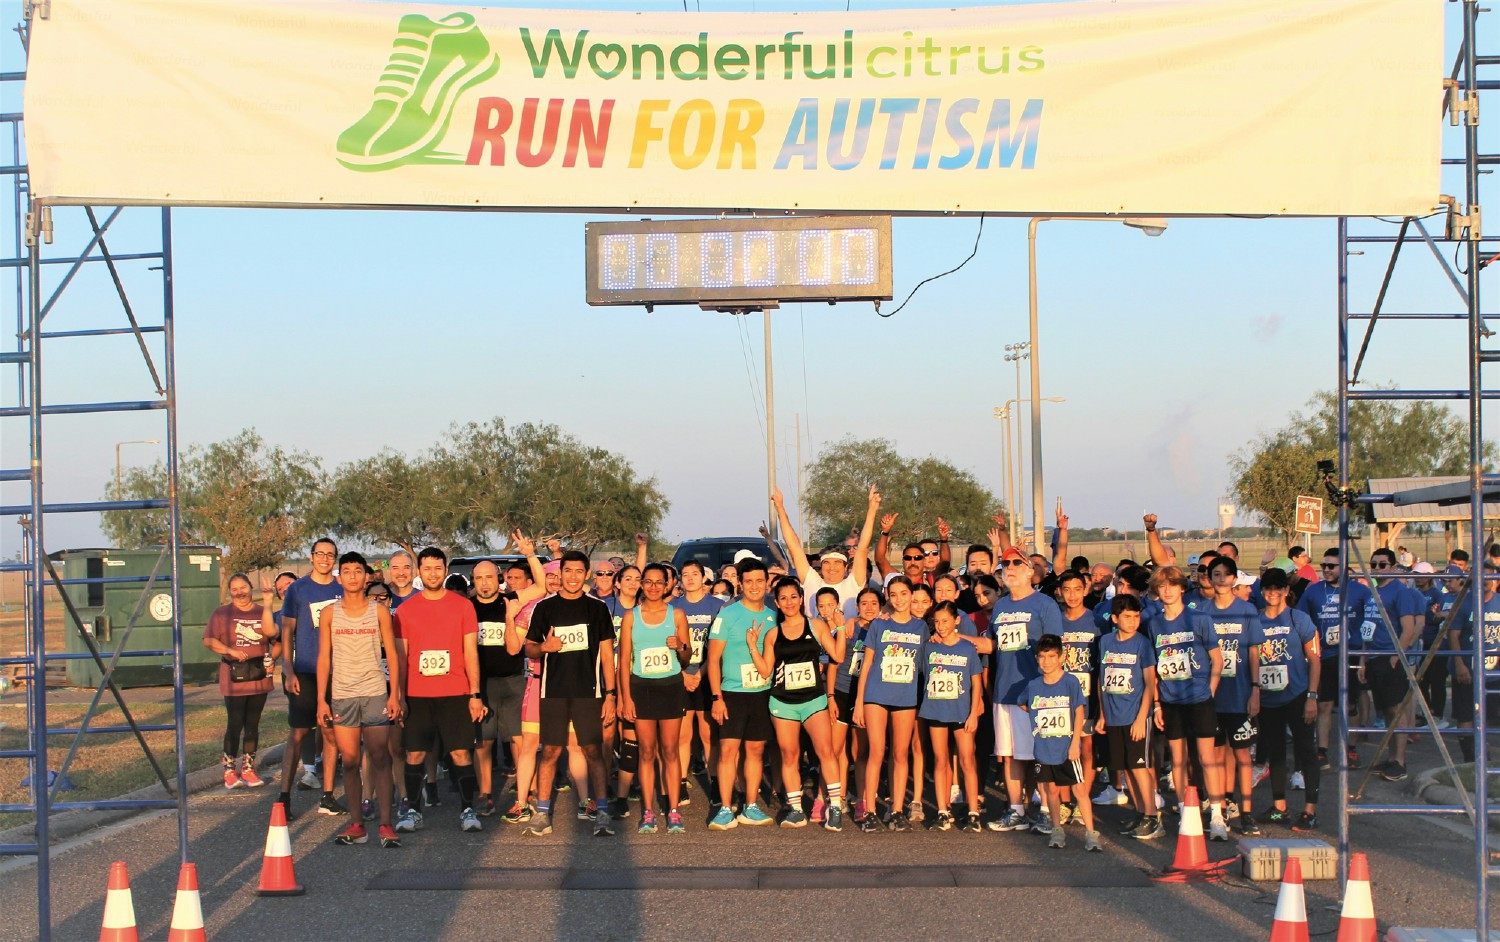 Run for Autism event hosted by Wonderful Citrus in Mission, TX.